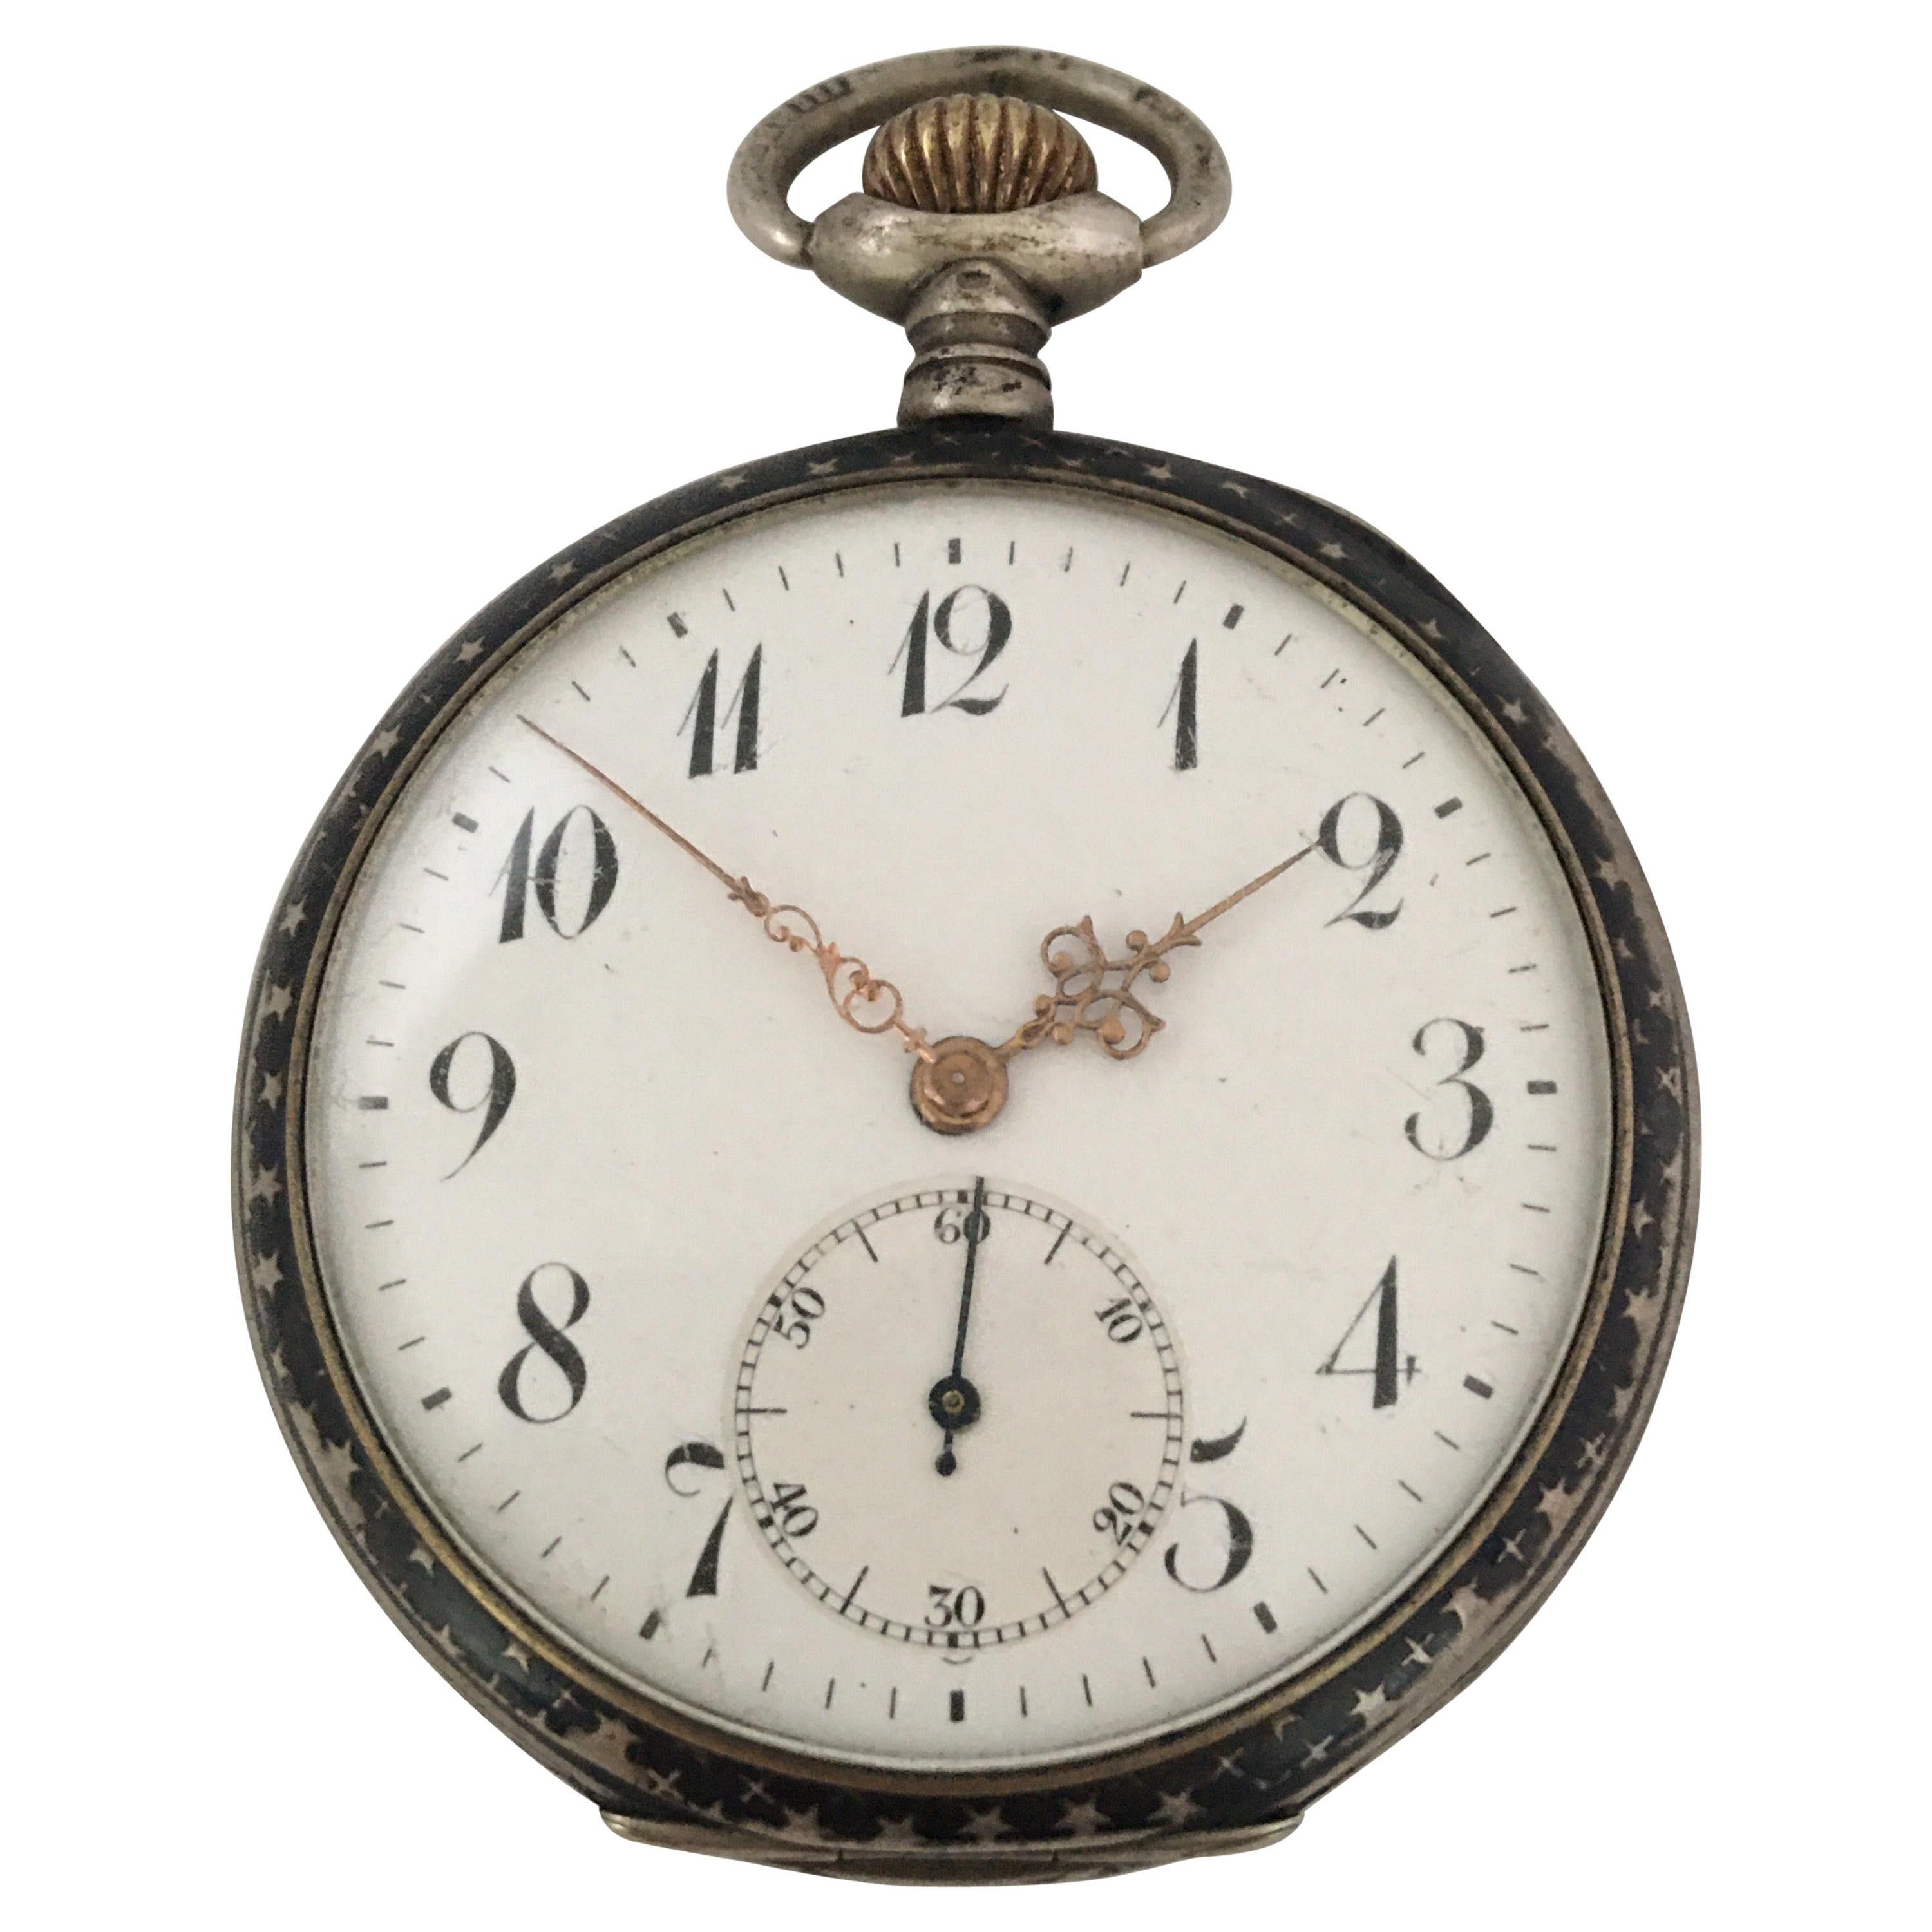 This beautiful 50mm diameter Keyless stem-winding good quality pocket watch is in good working condition and it is running well. Visible signs of ageing and wear with light surface marks on the glass and on the watch case as shown. the case has